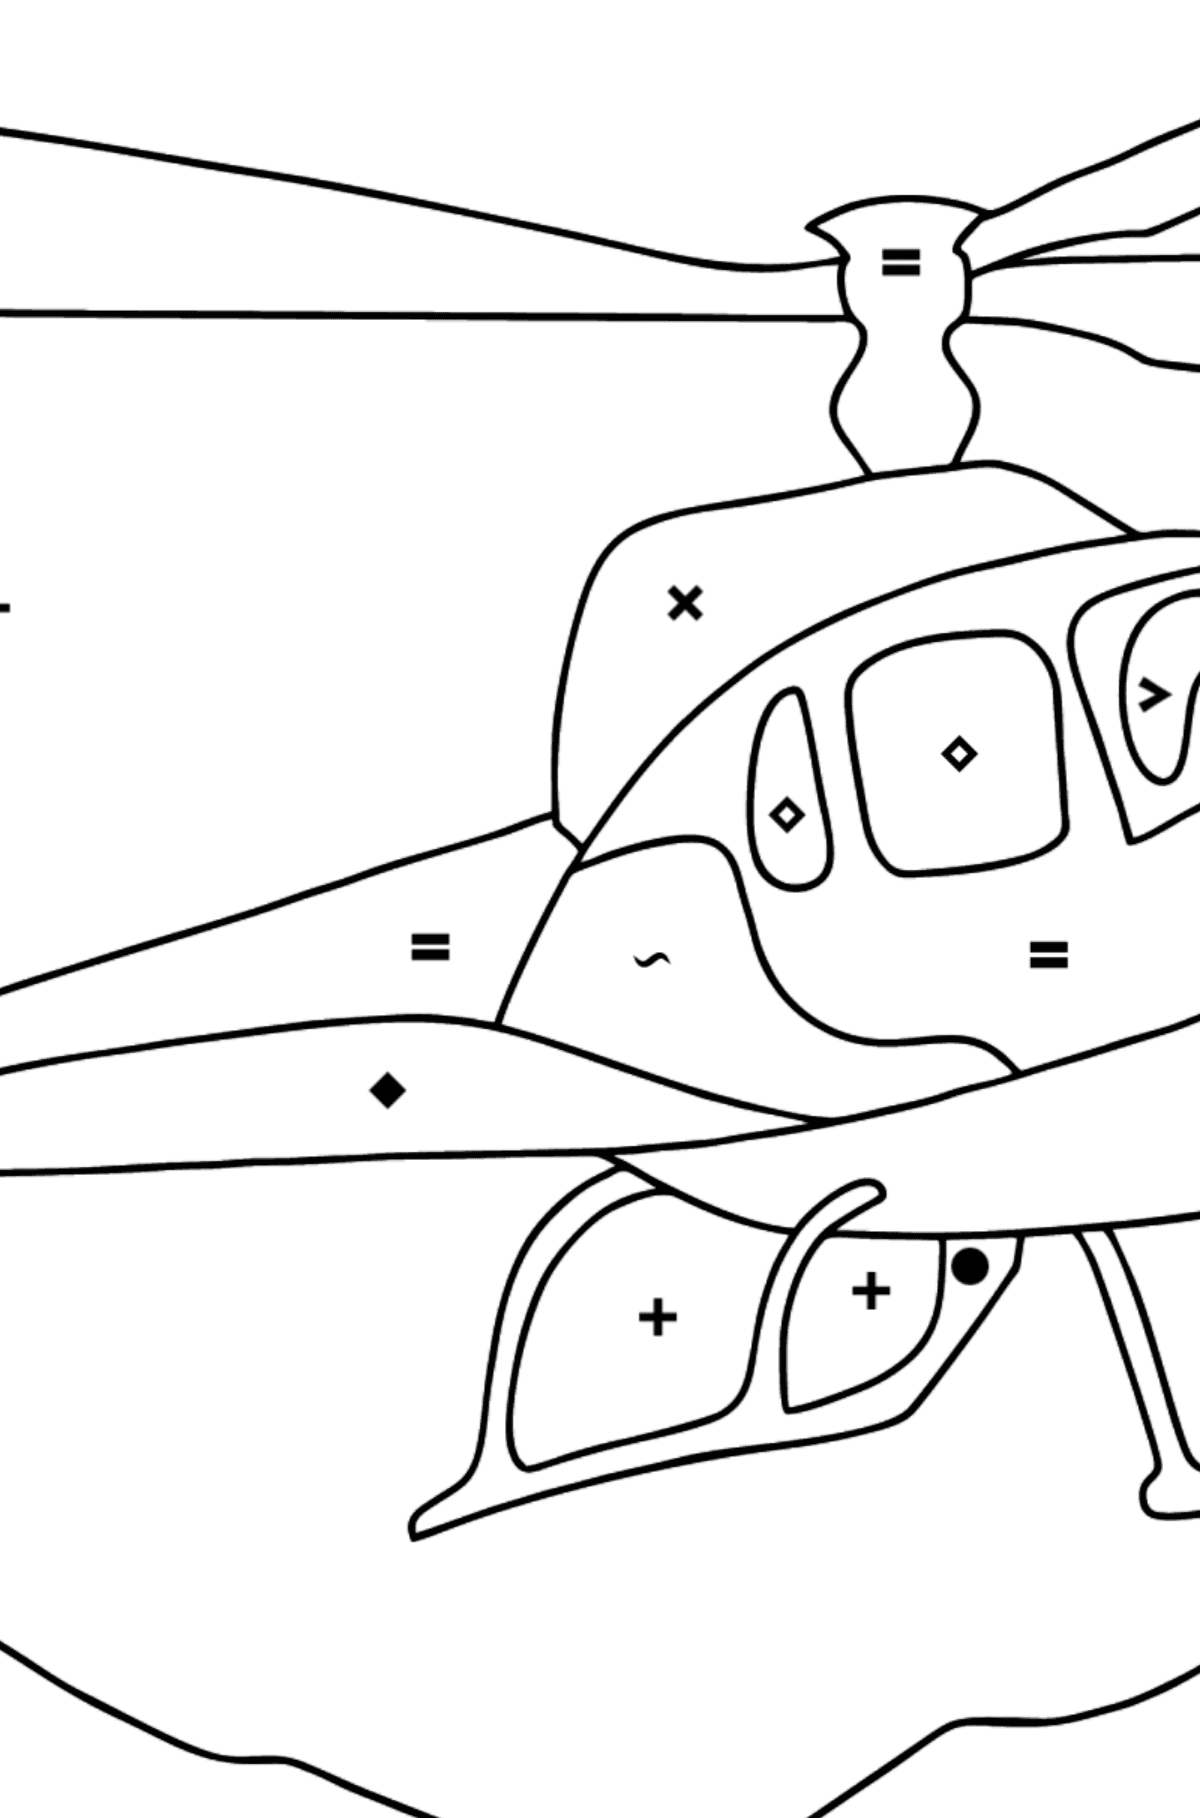 Coloring Page - A City Helicopter - Coloring by Symbols for Kids